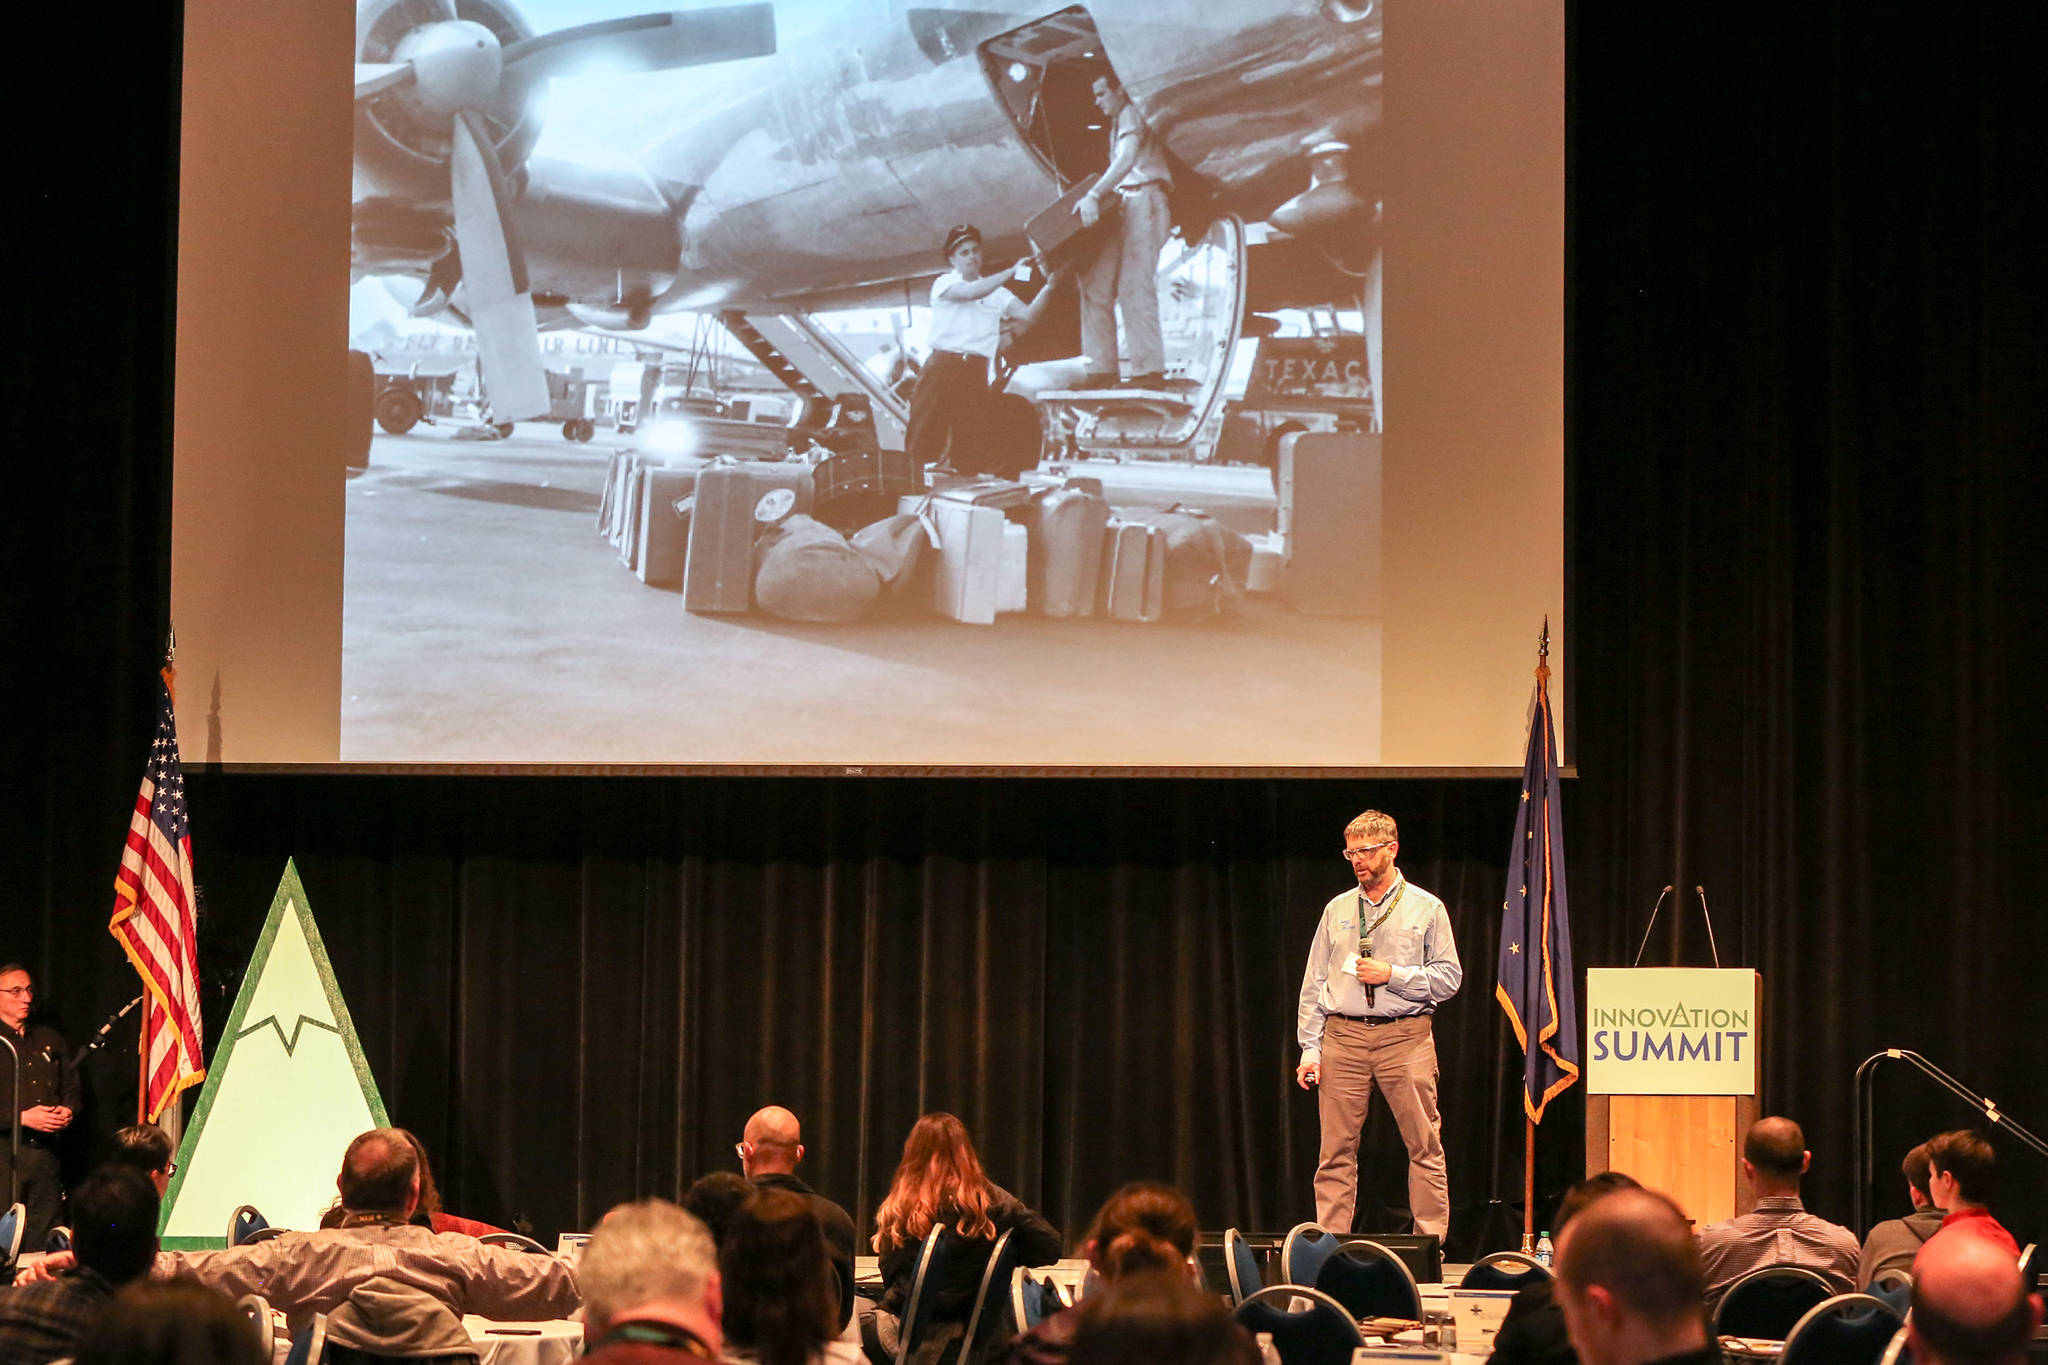 Tim Fulton of Sitka, founder of Ramper Innovations, pitches his business at the Innovation Summit 2019 Pitch Contest at Centennial Hall, Wednesday, Feb. 20, 2019. Courtesy Photo | Heather Holt)